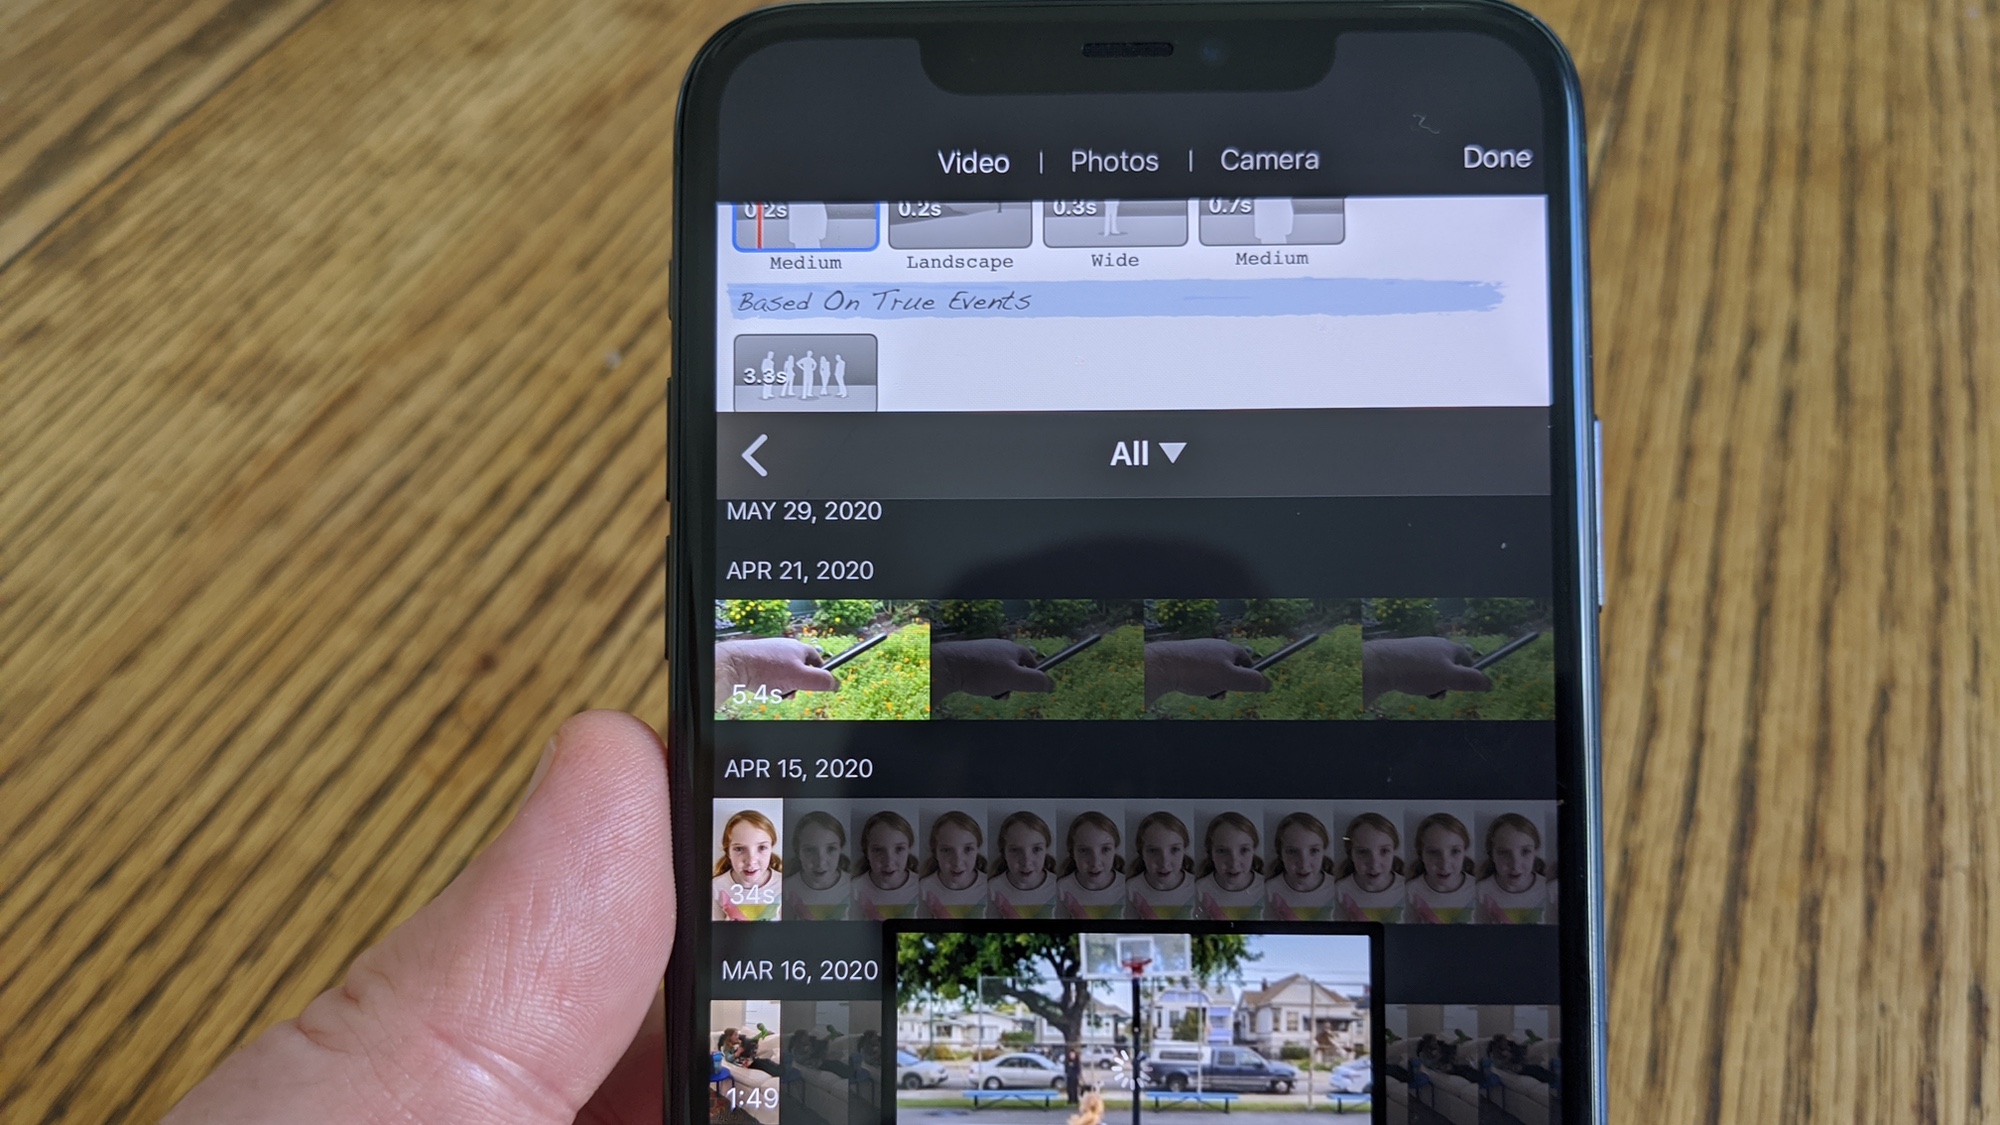 spotlight search brings up old version of imovie